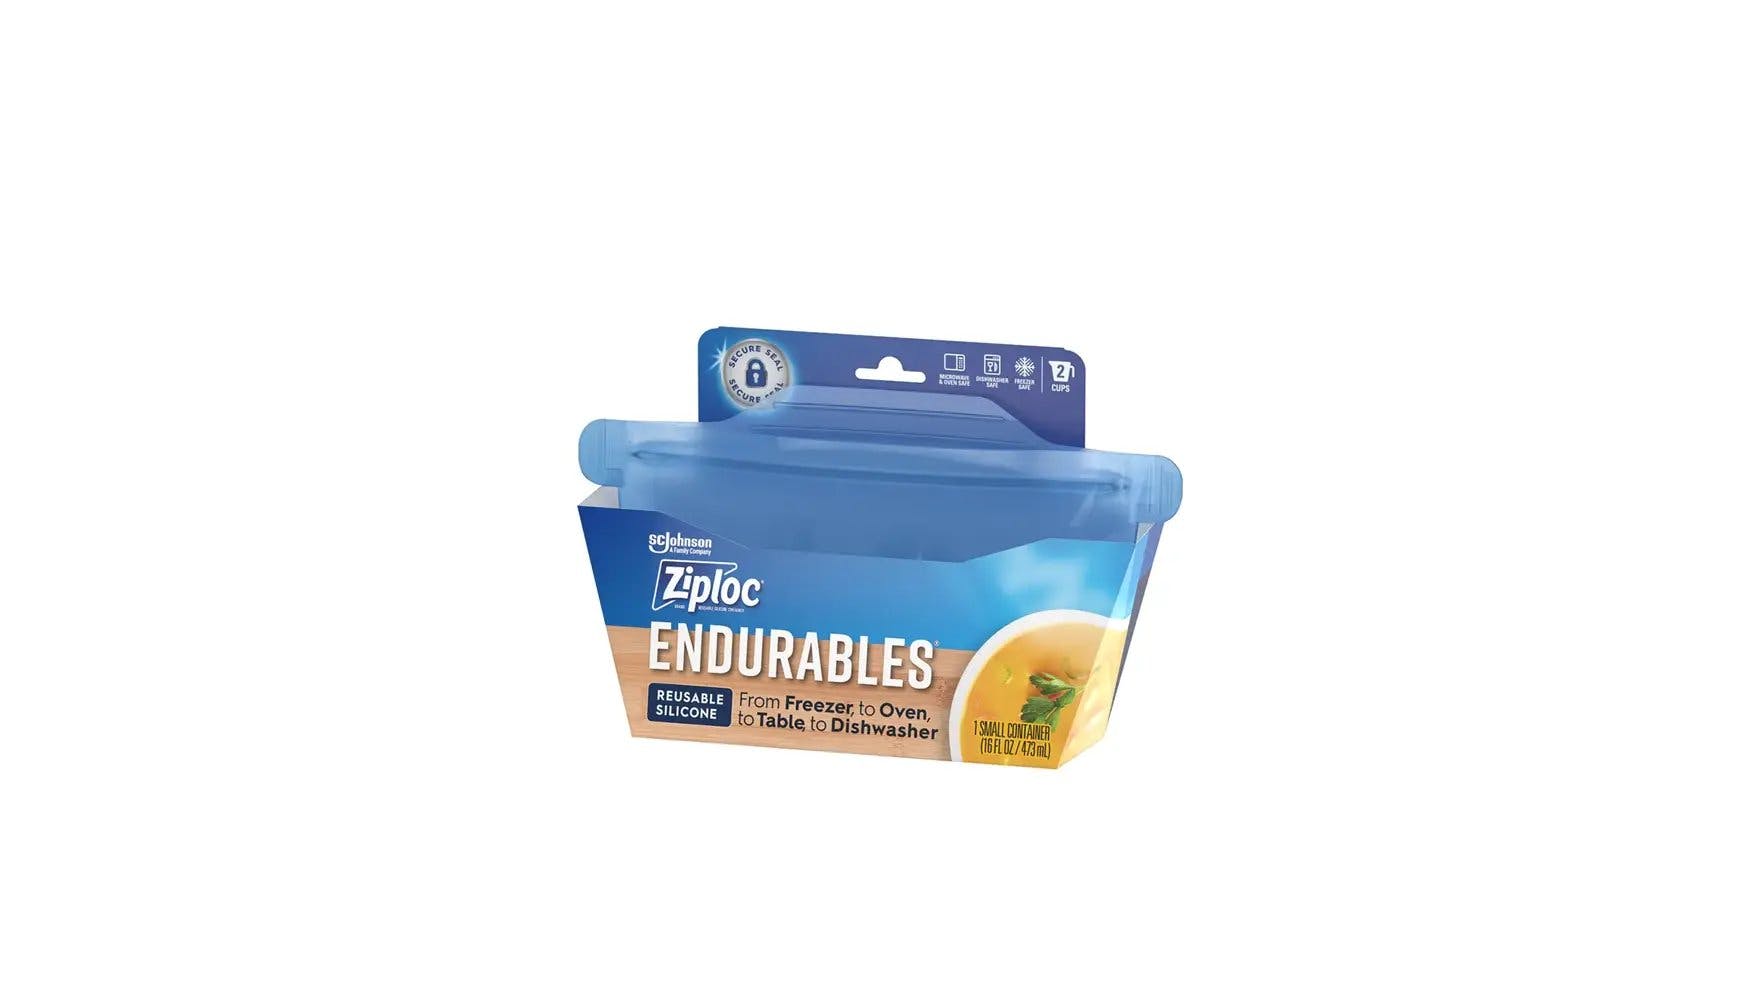 Front of Ziploc Endurables small container packaging.